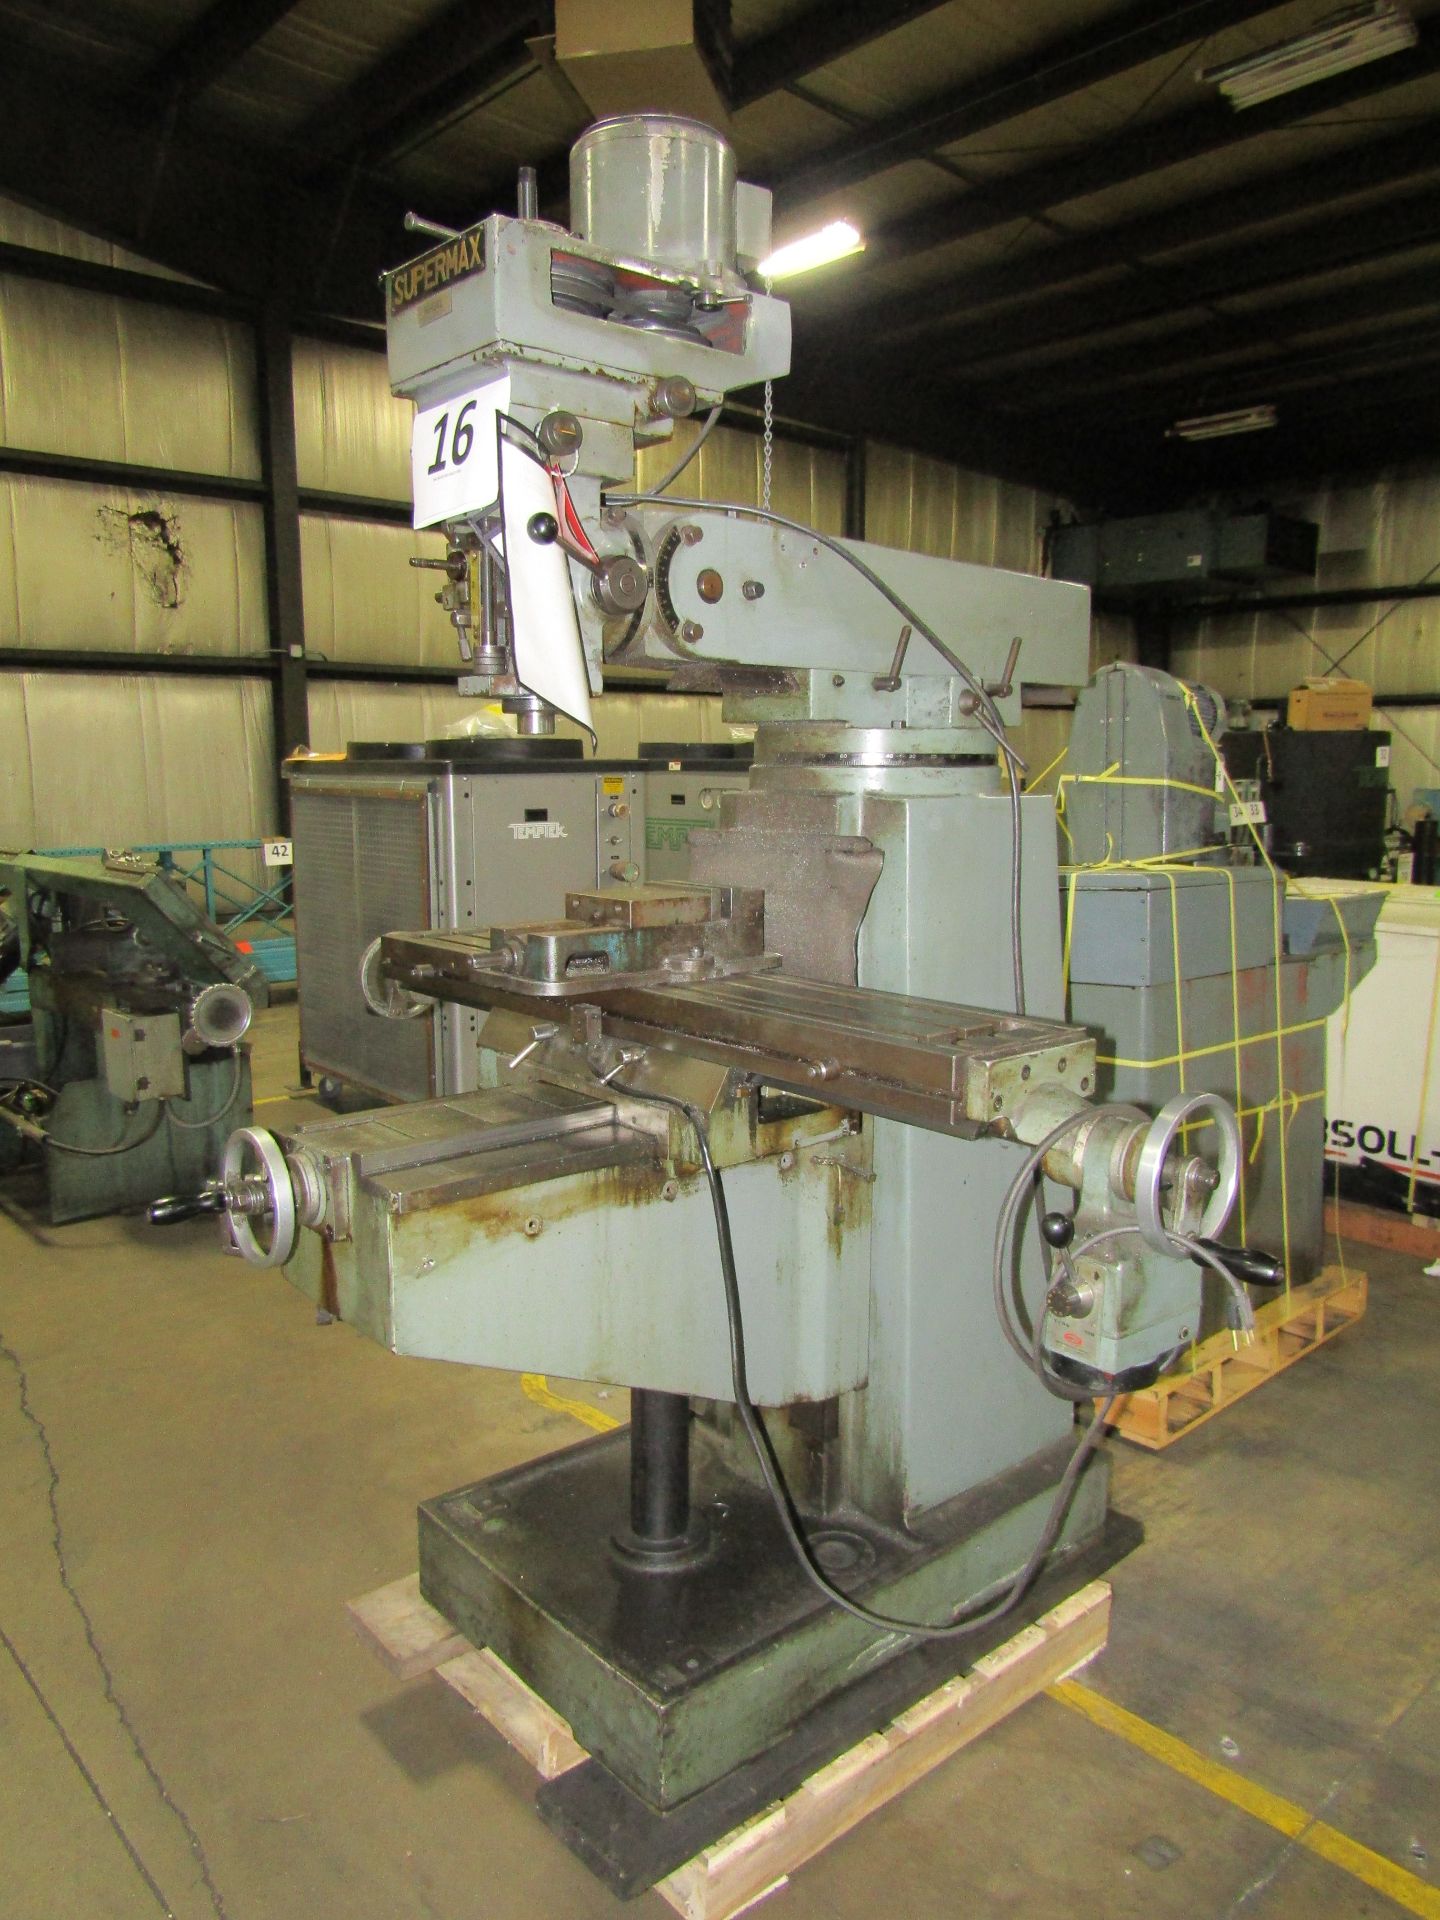 Supermax Vertical Mill M#: YCM-16VA S#: 1175 49 X 9 Power Table W/ Vise - Image 3 of 5